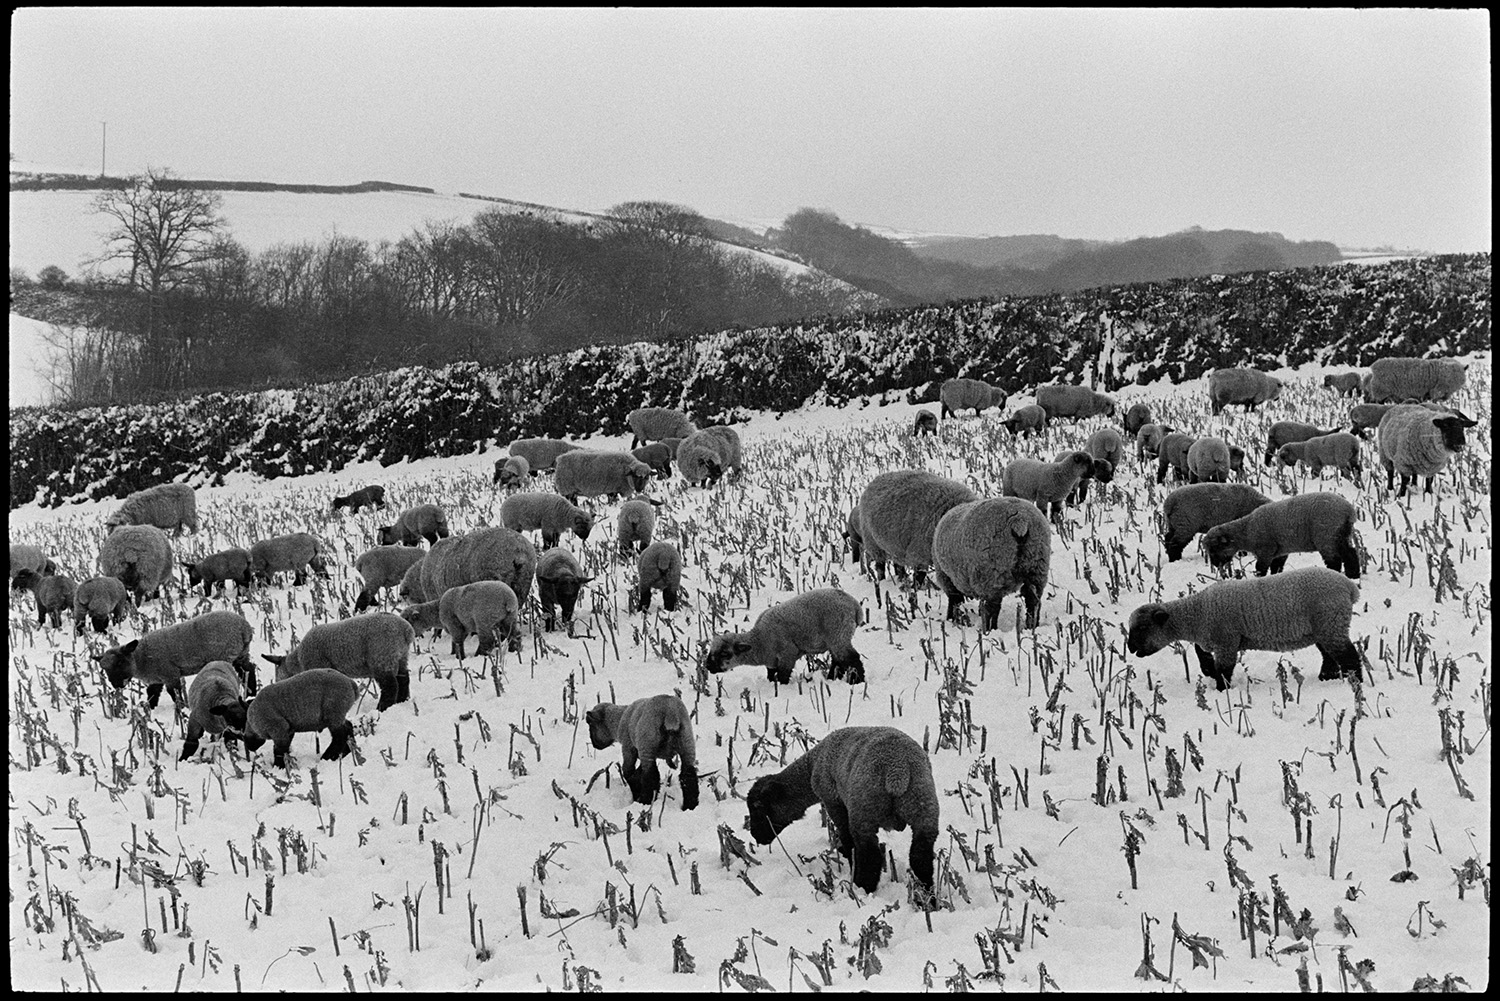 Snow, sheep and lambs in snowy root field. 
[Sheep and lambs grazing in a snow covered field with the remains of a crop, near Westacott, Riddlecombe. More snow covered fields and trees can be seen in the background.]